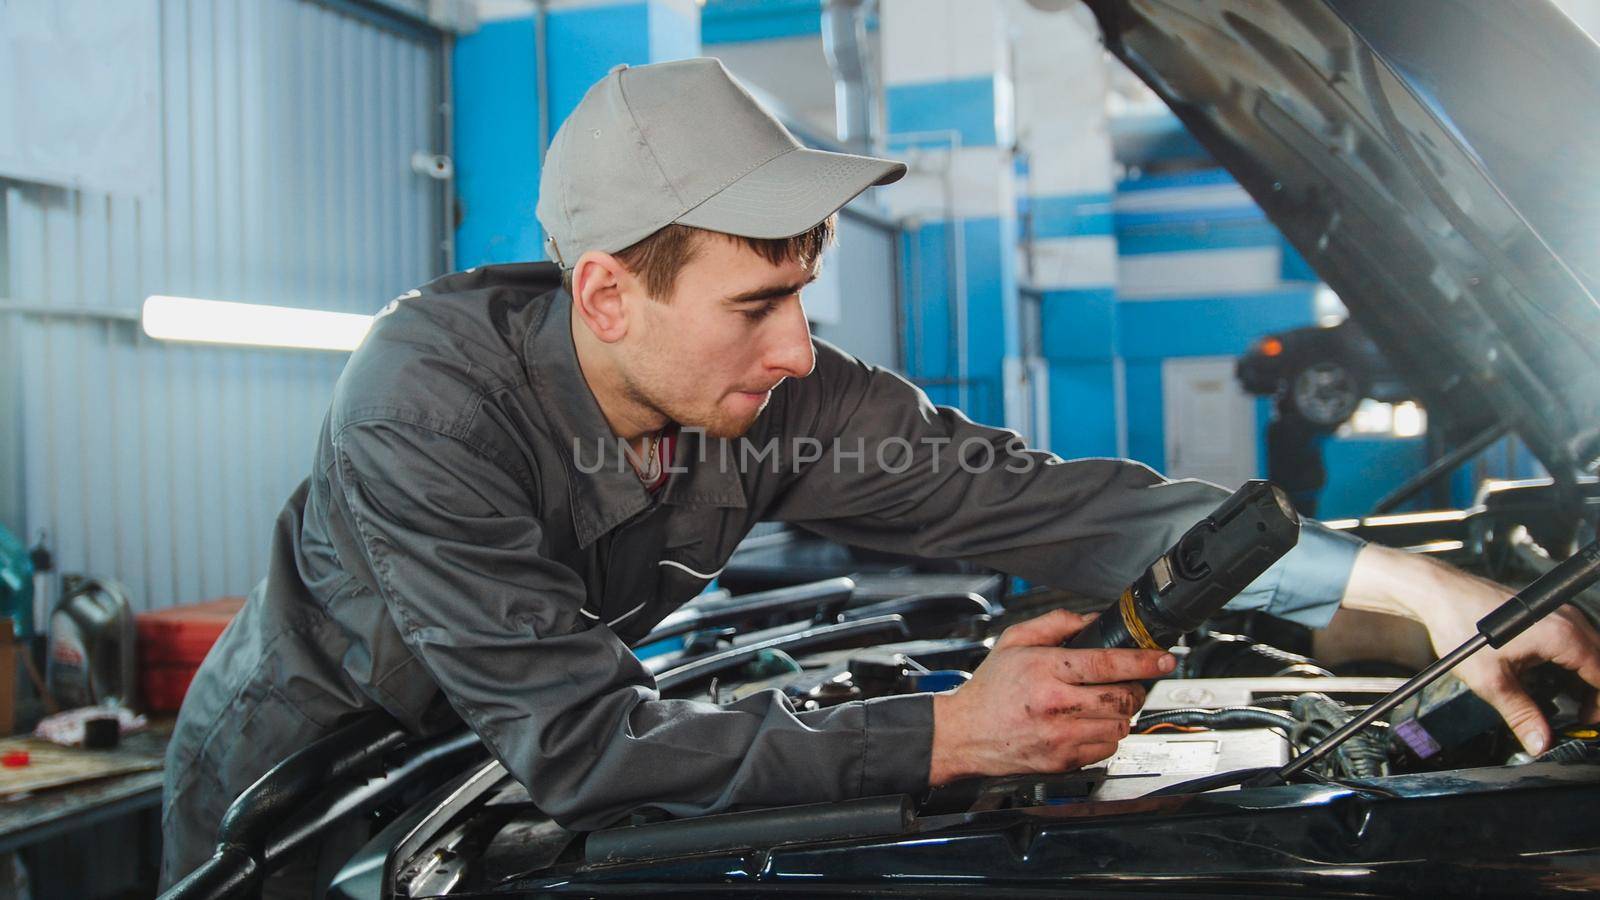 Mechanic in overalls looking to hood of the car - automobile service repairing, close up